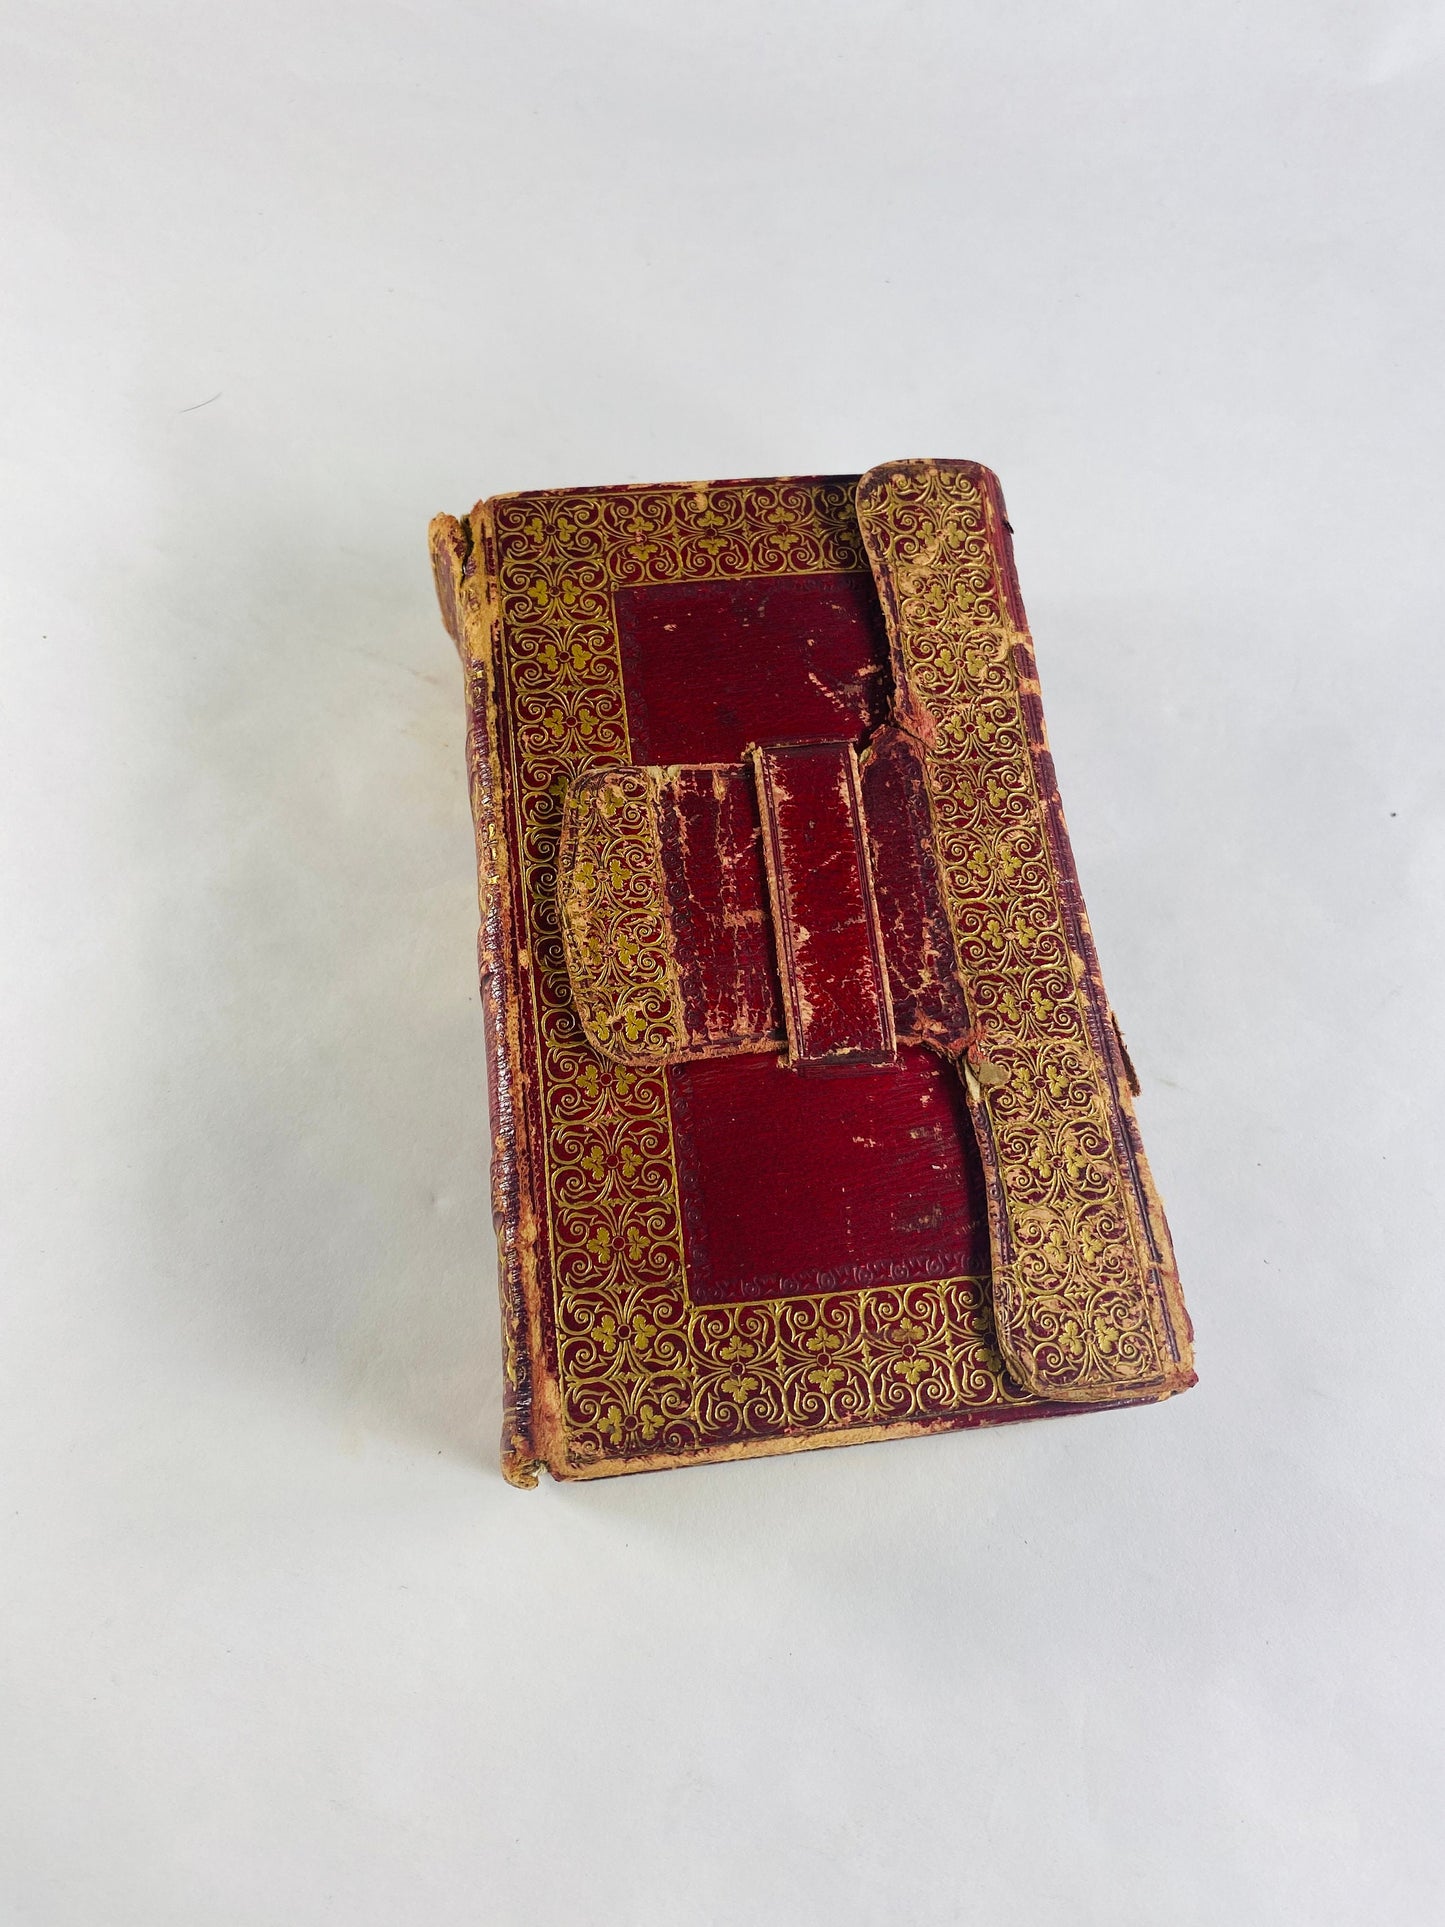 1820 Holy Bible Oxford Worn red Morocco Leather Cover, Collingwood Post Revolutionary War Old Testament Jesus Christ Miniature Collectible